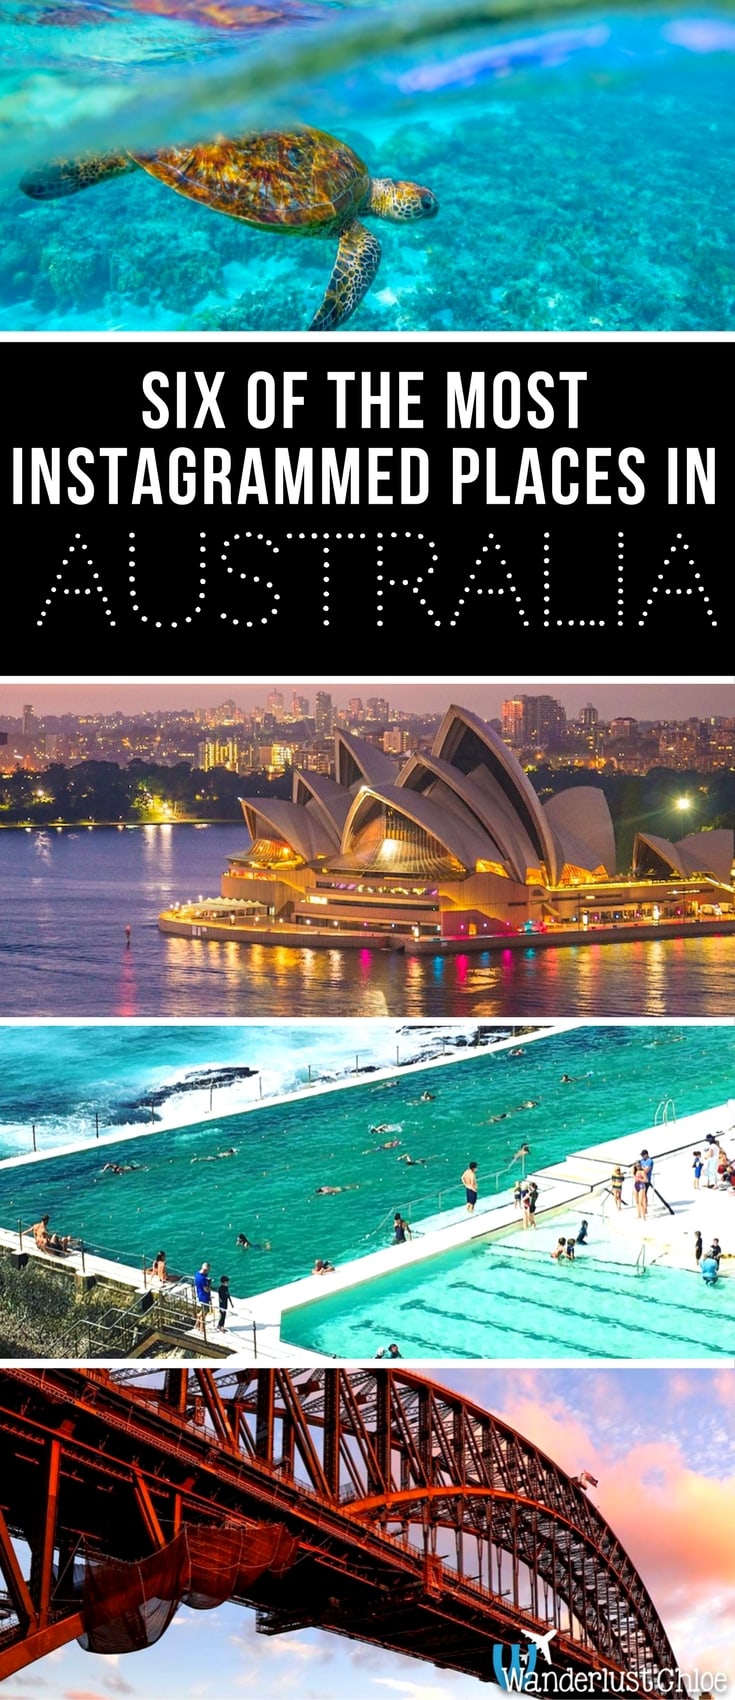 Six Of The Most Instagrammed Places In Australia